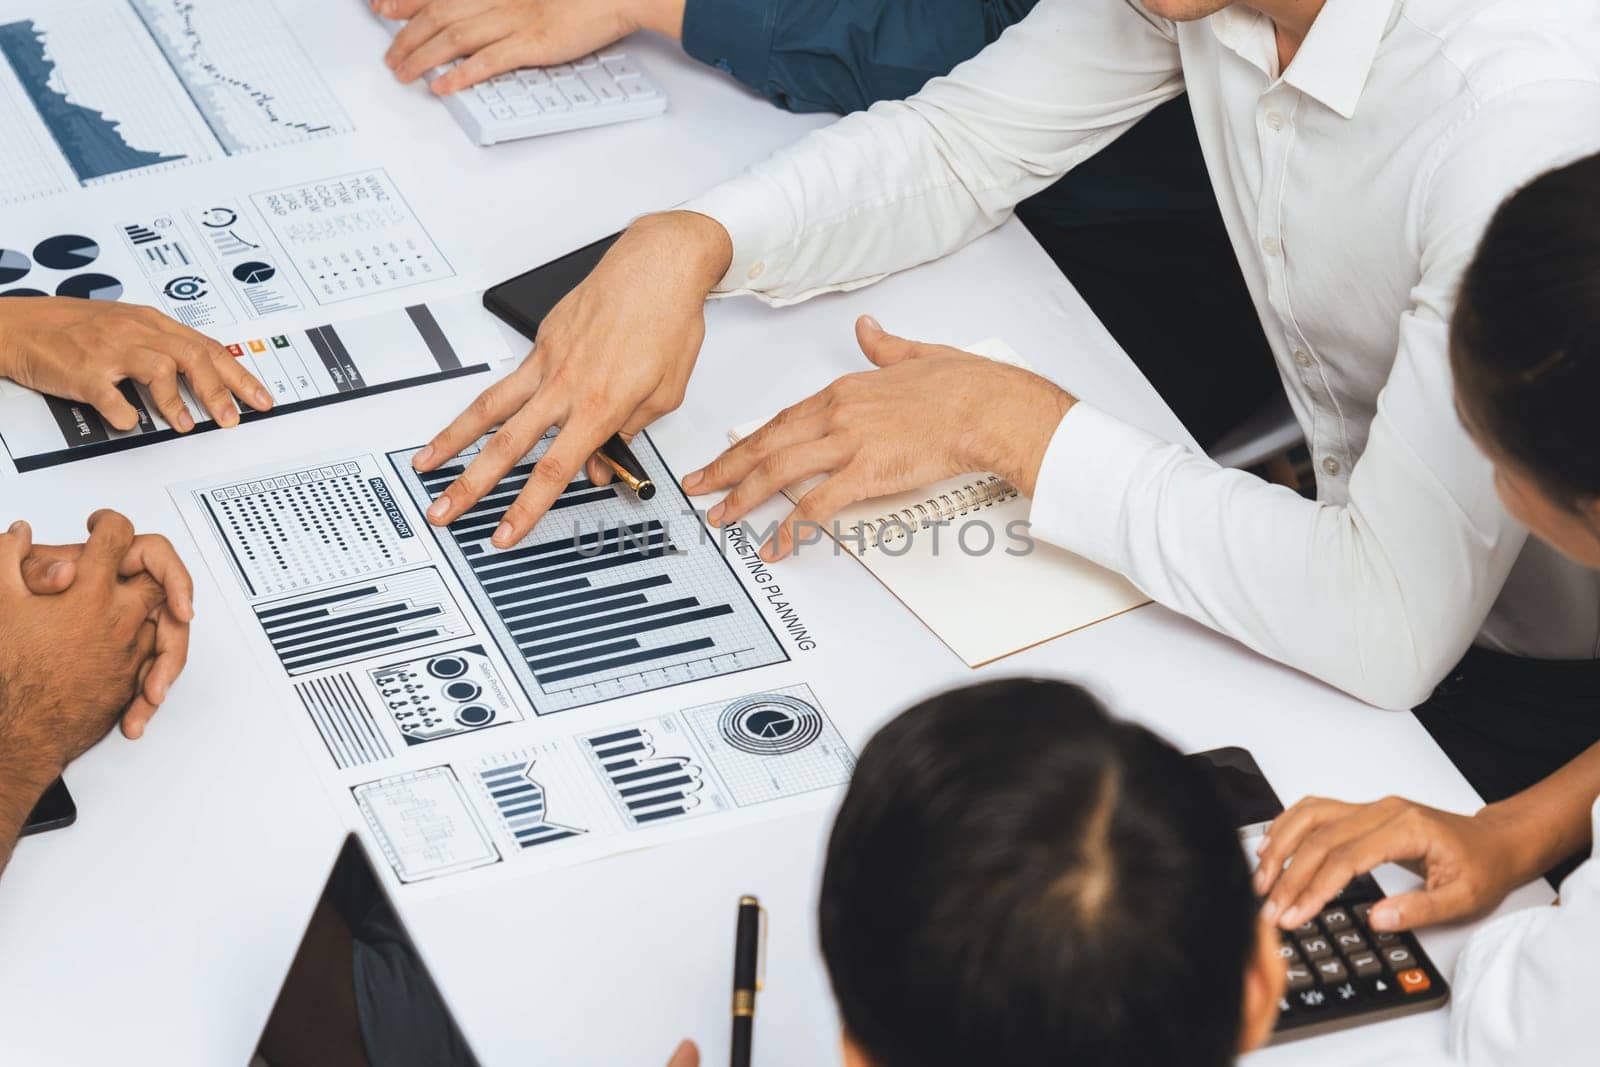 Analyst team utilizing BI Fintech to analyze financial data at table in meeting room. Businesspeople analyzing BI dashboard power on paper for business insight and strategic marketing planning.Prudent